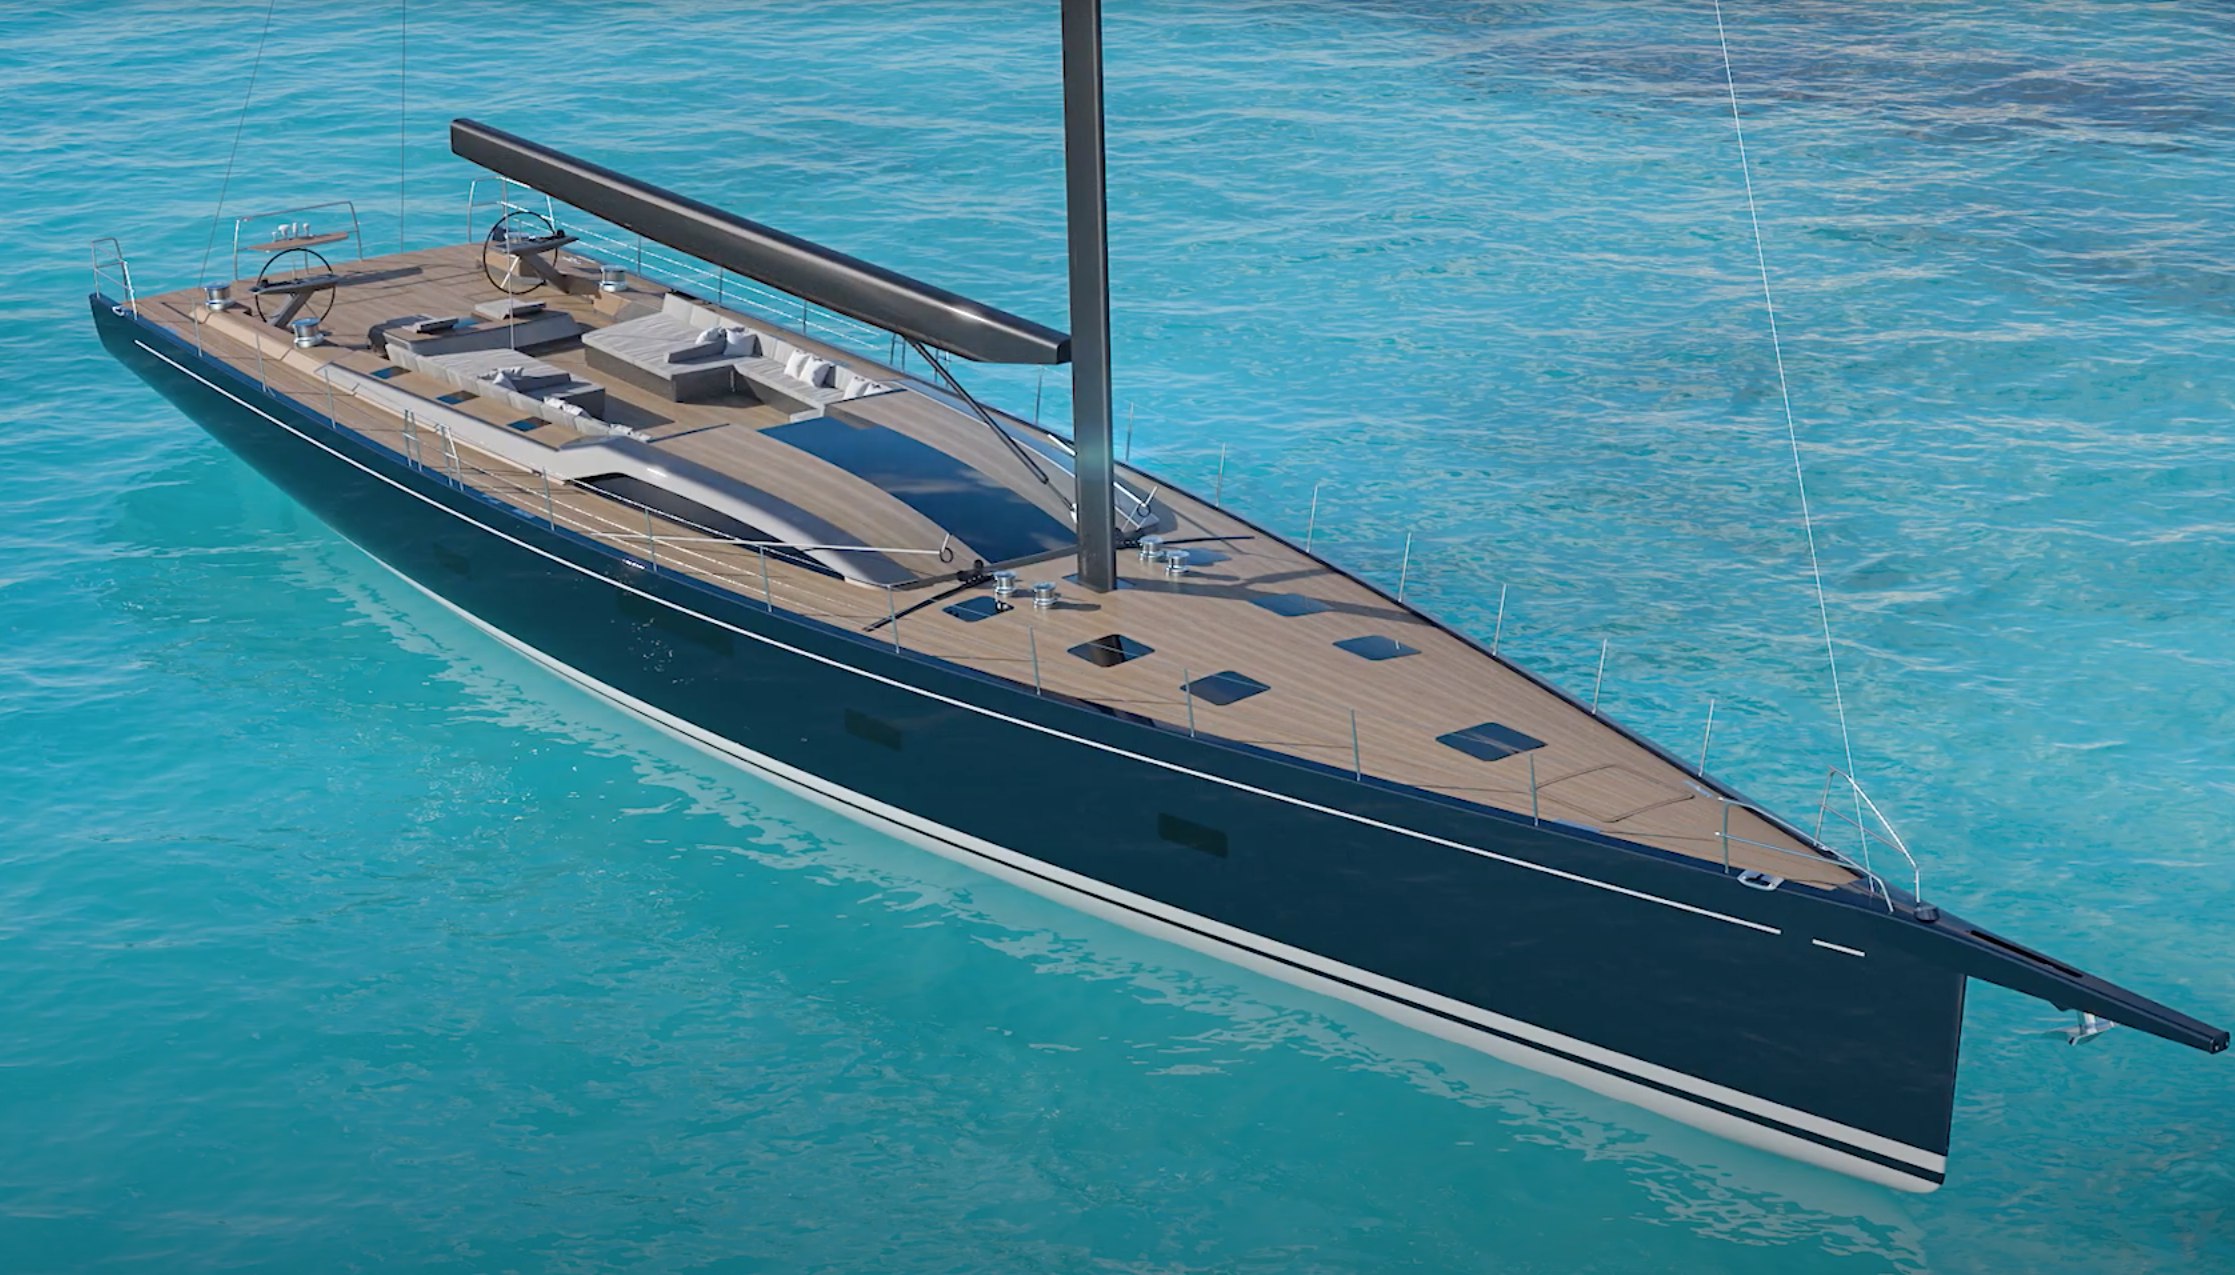 Emirates Team New Zealand AC40 Foiling Yacht Available for Private Buyers -  Yacht Harbour